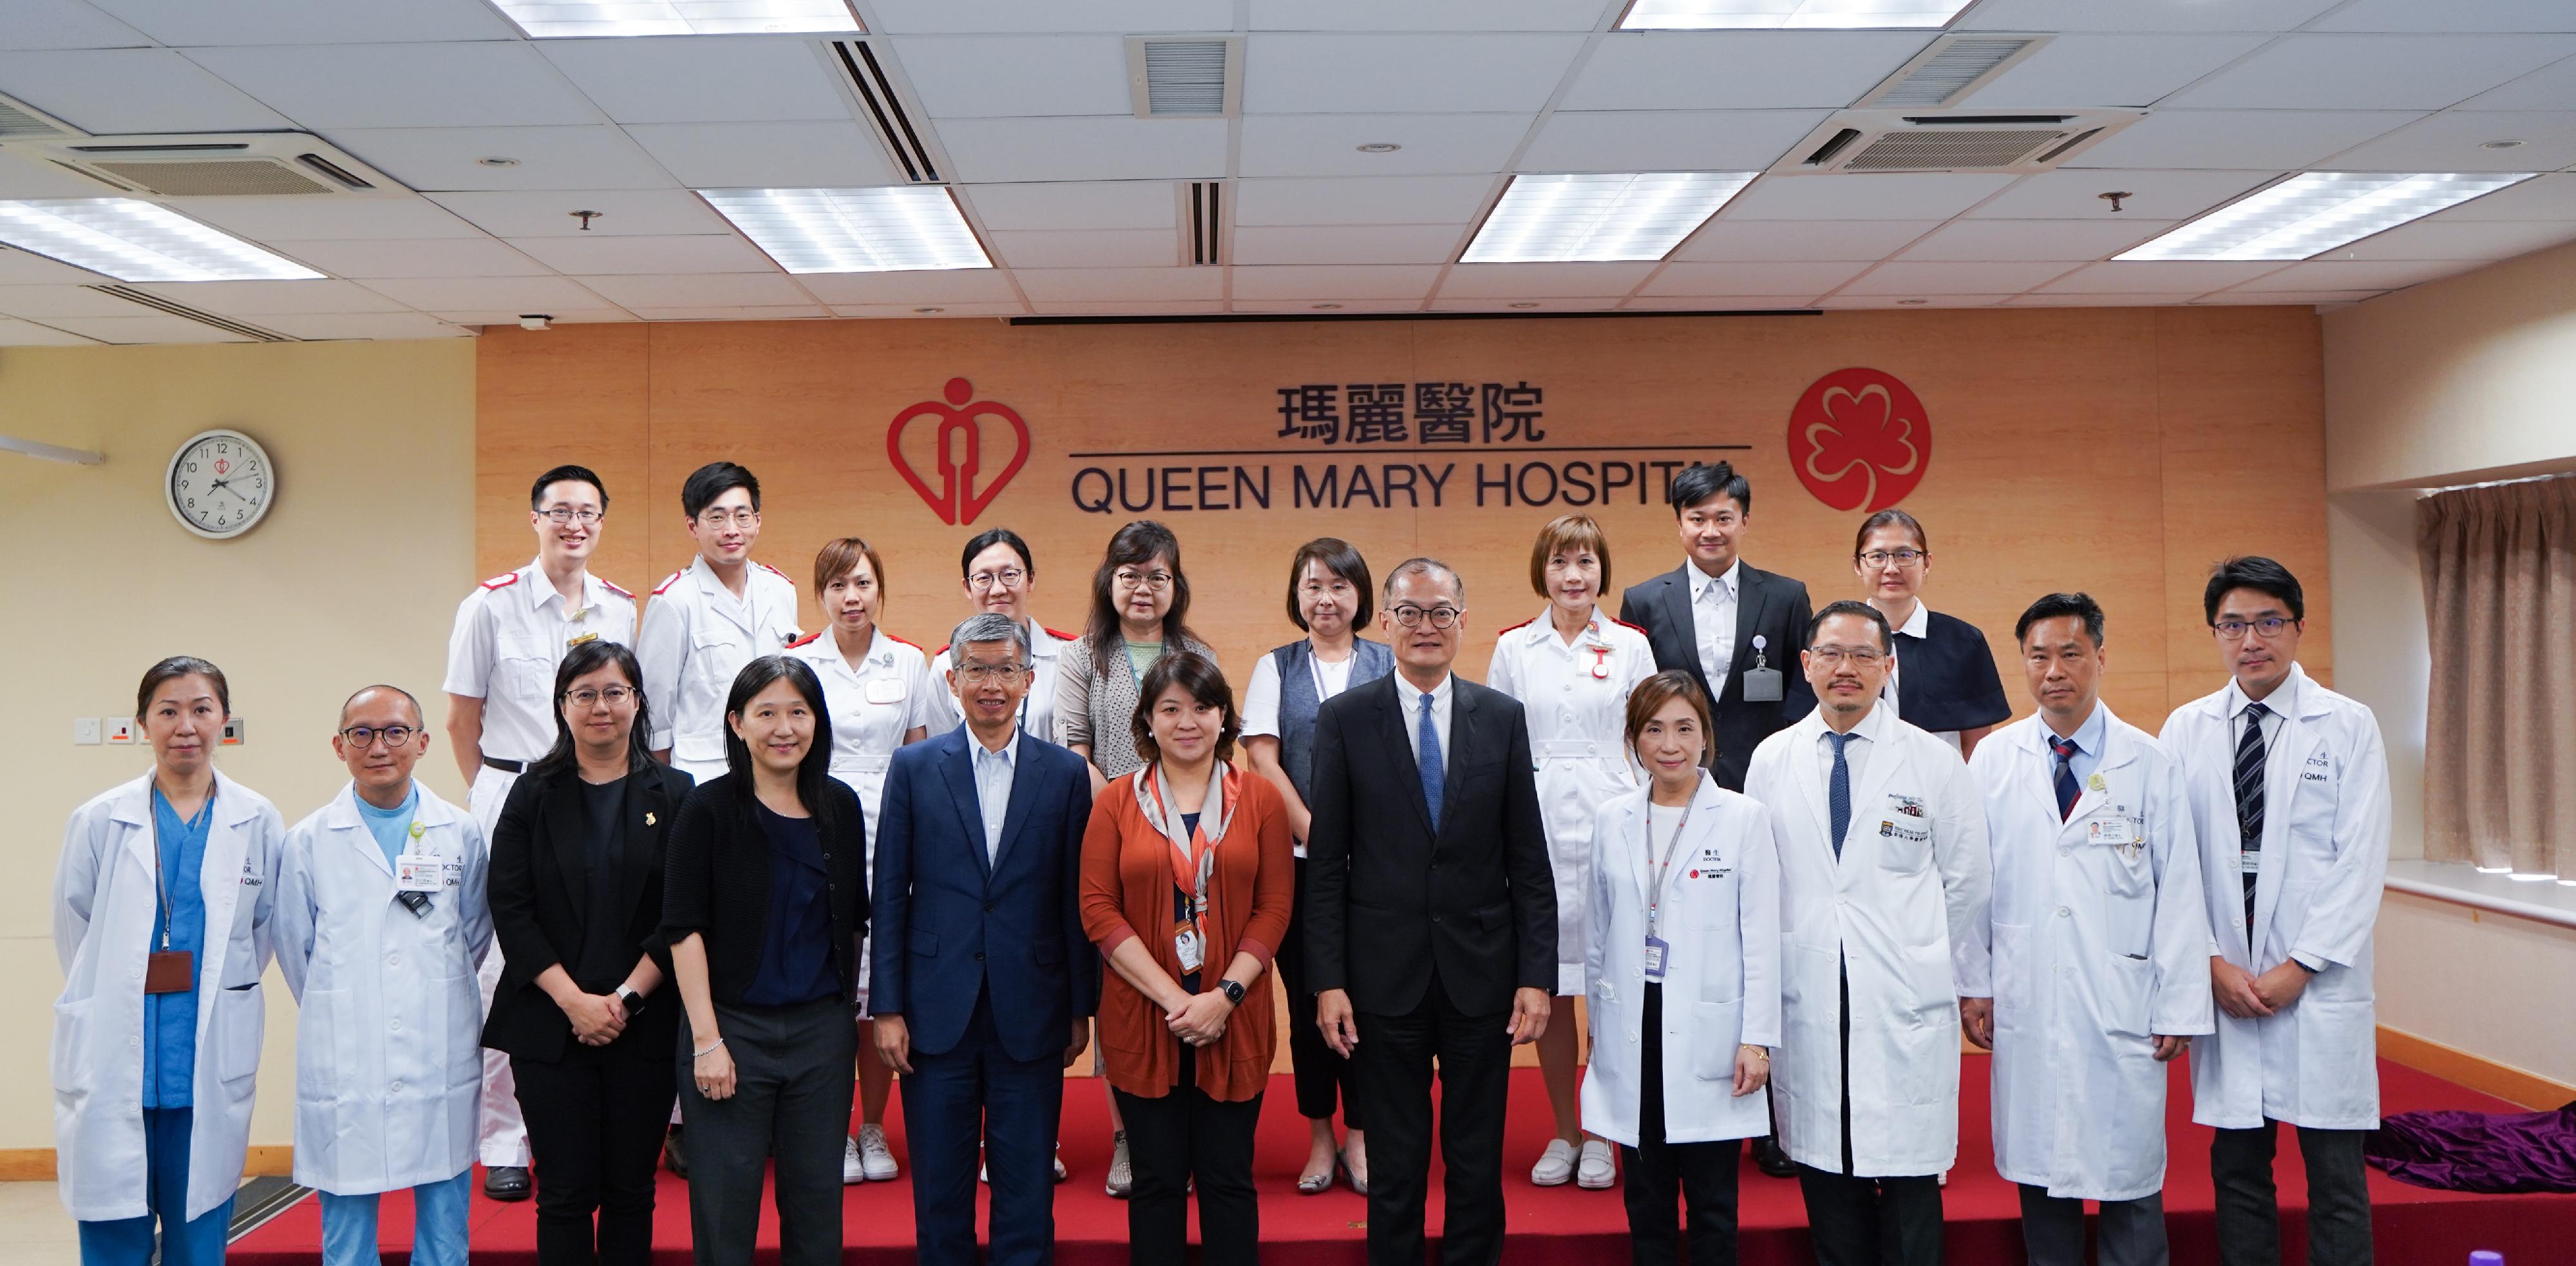 The Secretary for Health, Professor Lo Chung-mau, visited the Queen Mary Hospital today (August 8). Photo shows Professor Lo (front row, fifth right); the Under Secretary for Health, Dr Libby Lee (front row, sixth left); the Director of Cluster Services of the Hospital Authority (HA), Dr Simon Tang (front row, fifth left); the Cluster Chief Executive of Hong Kong West Cluster of the HA, Dr Theresa Li (front row, fourth right), and healthcare staff involved in the setting up of the Integrated Cardiovascular Diseases Centre of the hospital.